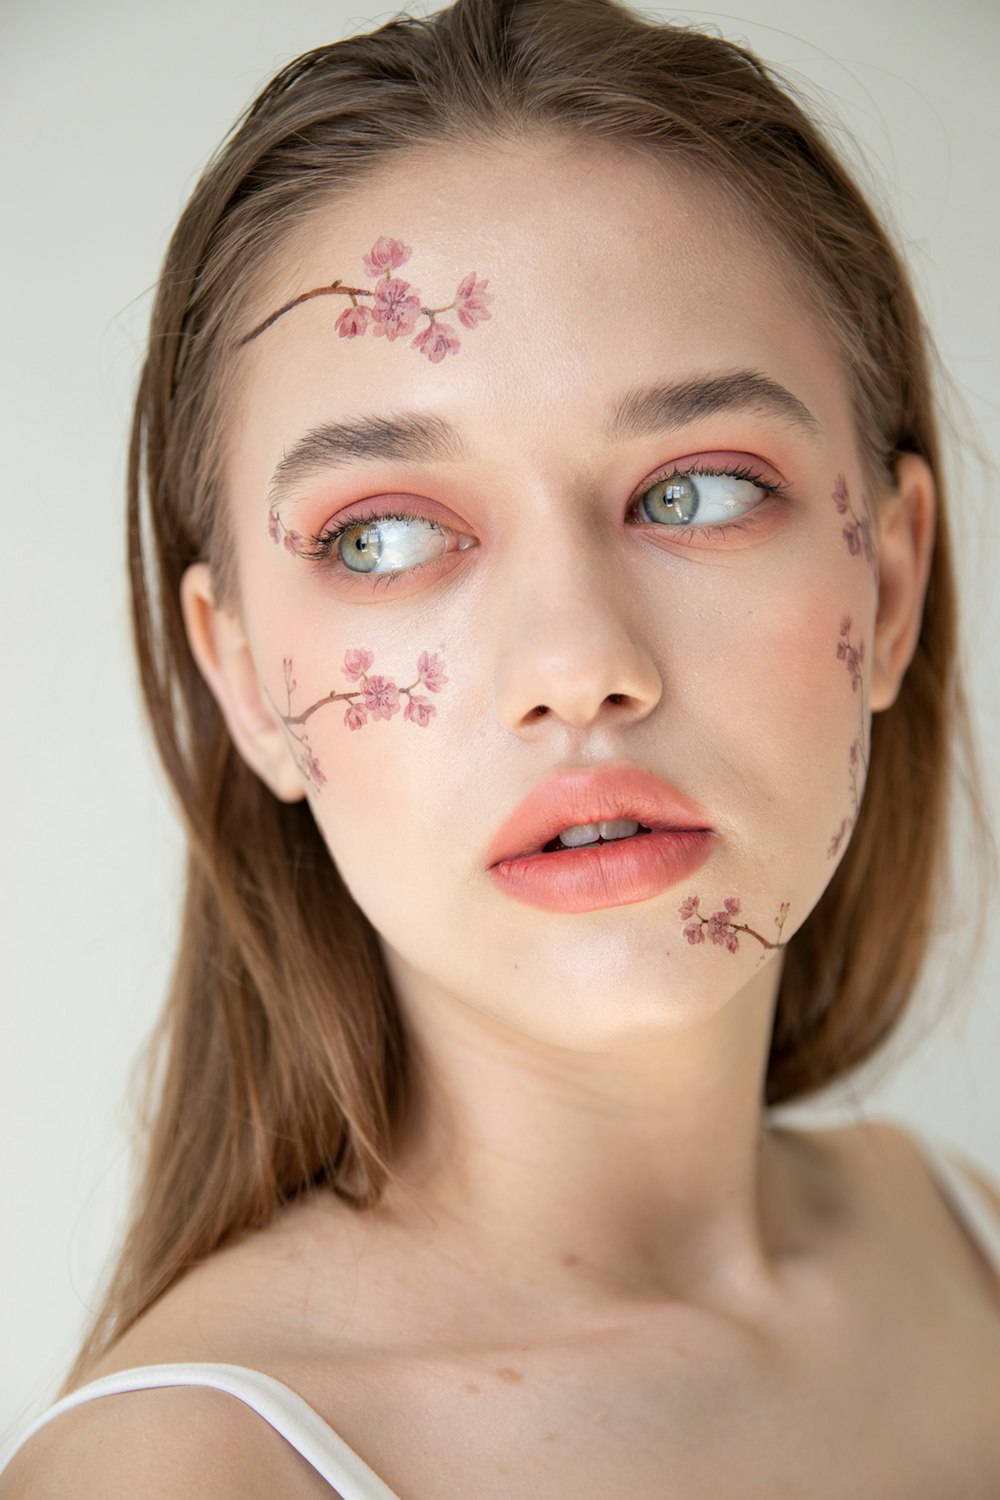 woman with pink and white floral face paint